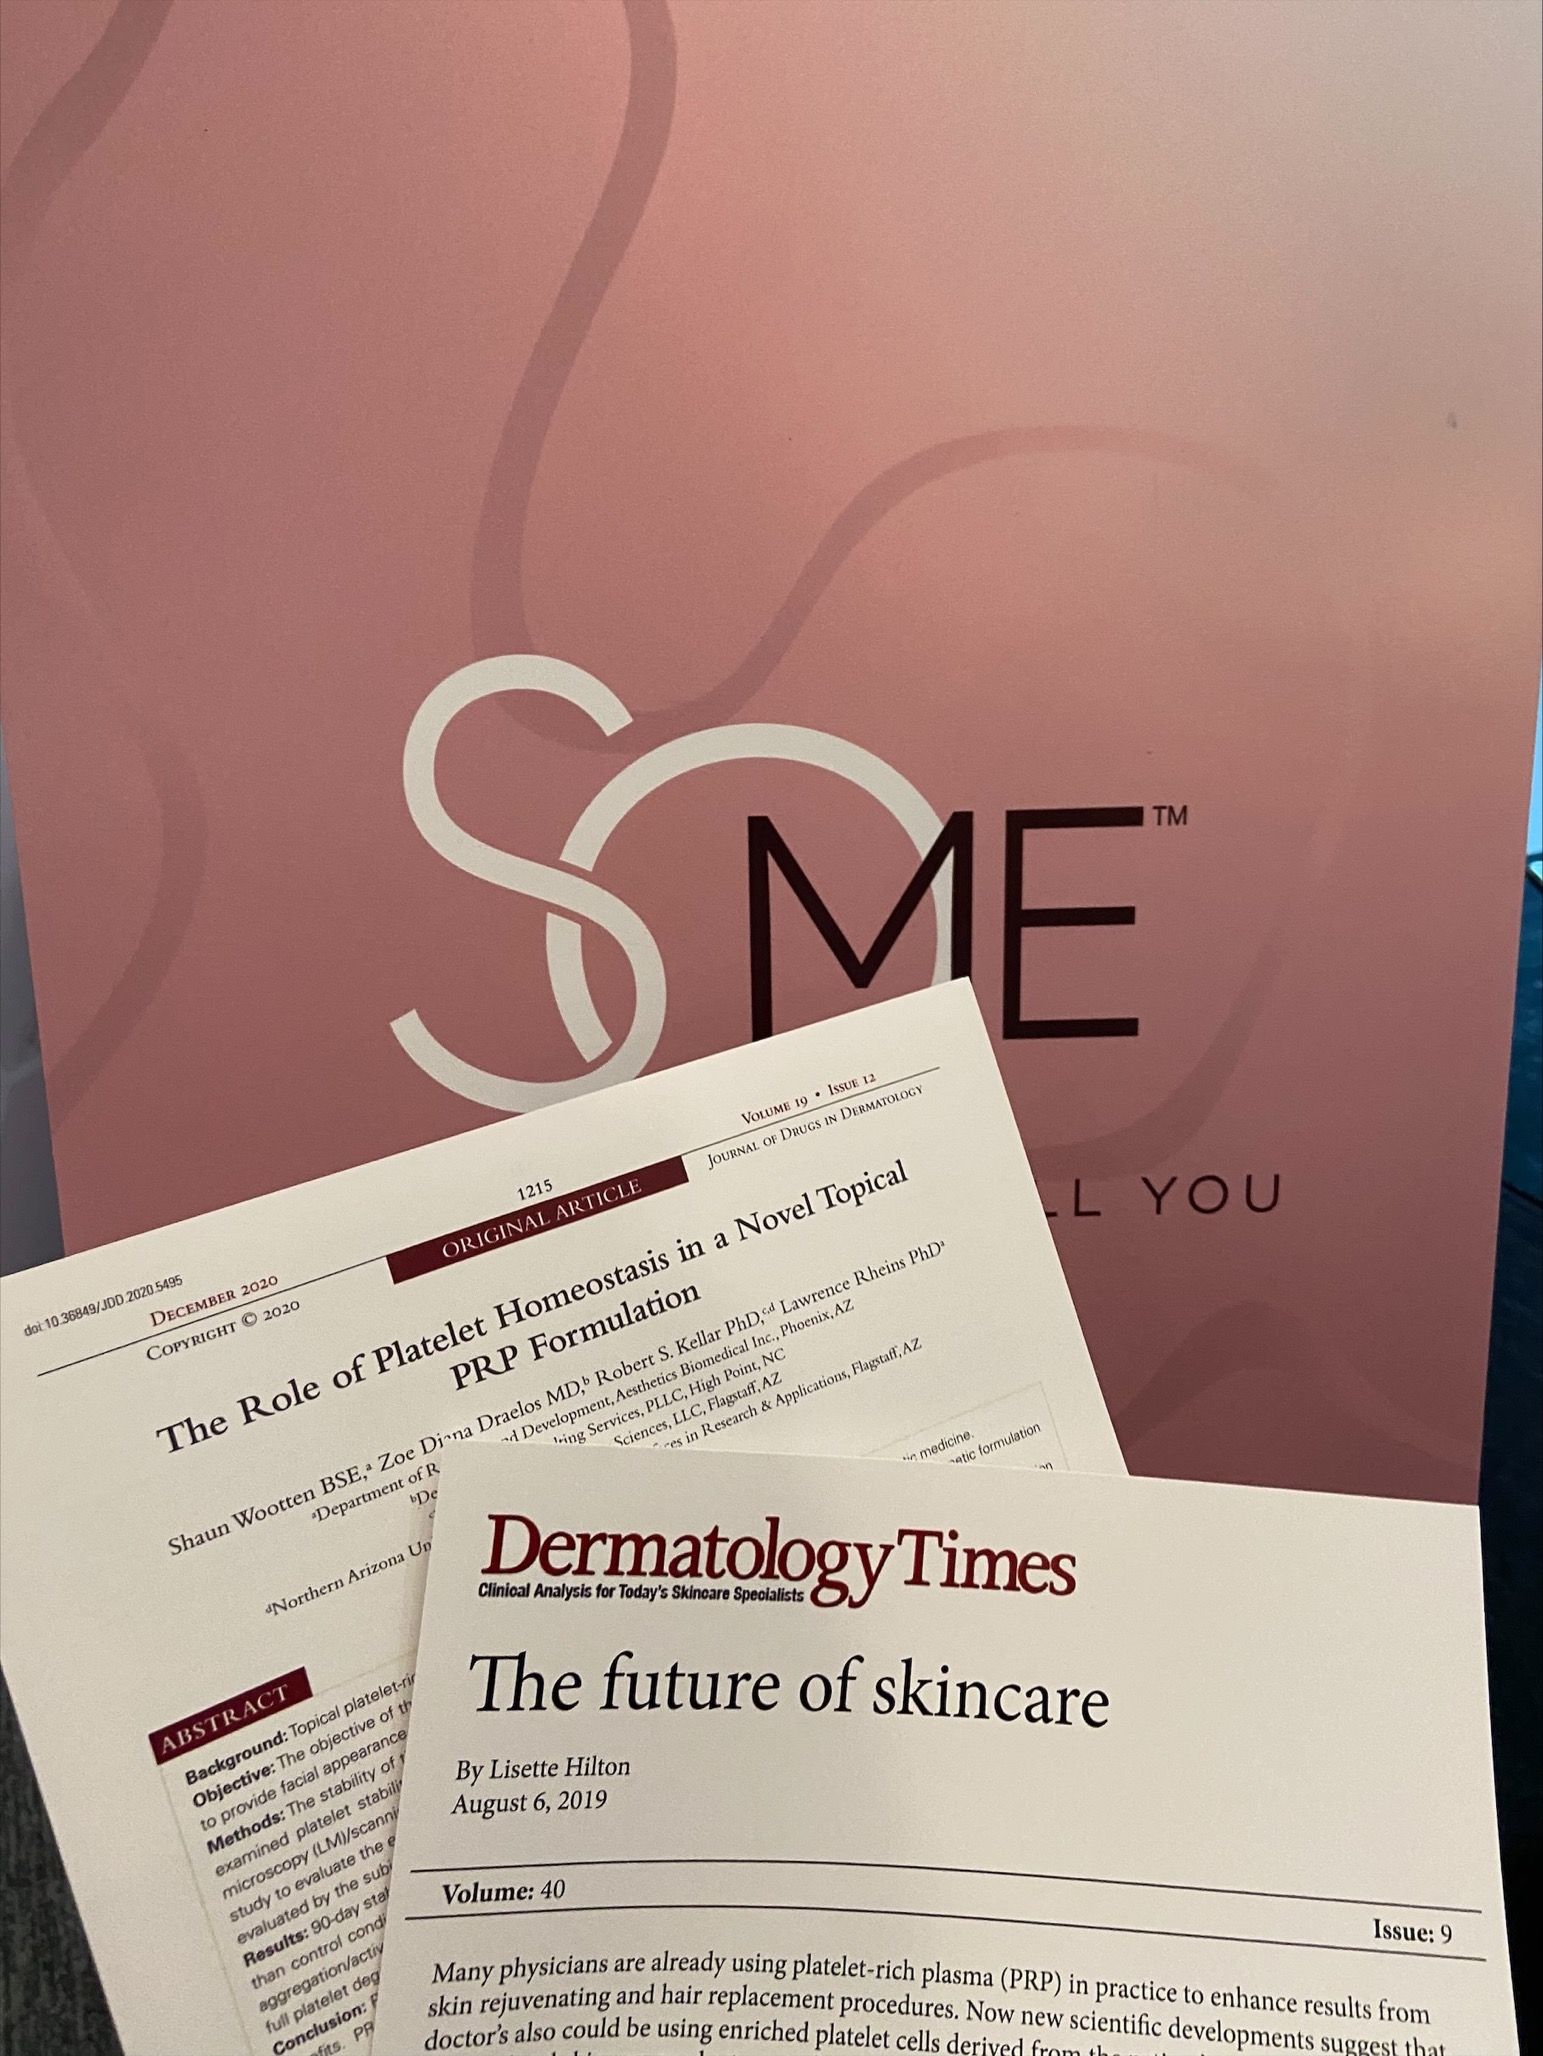 The SoME Skincare table featured some article from Dermatology Times.